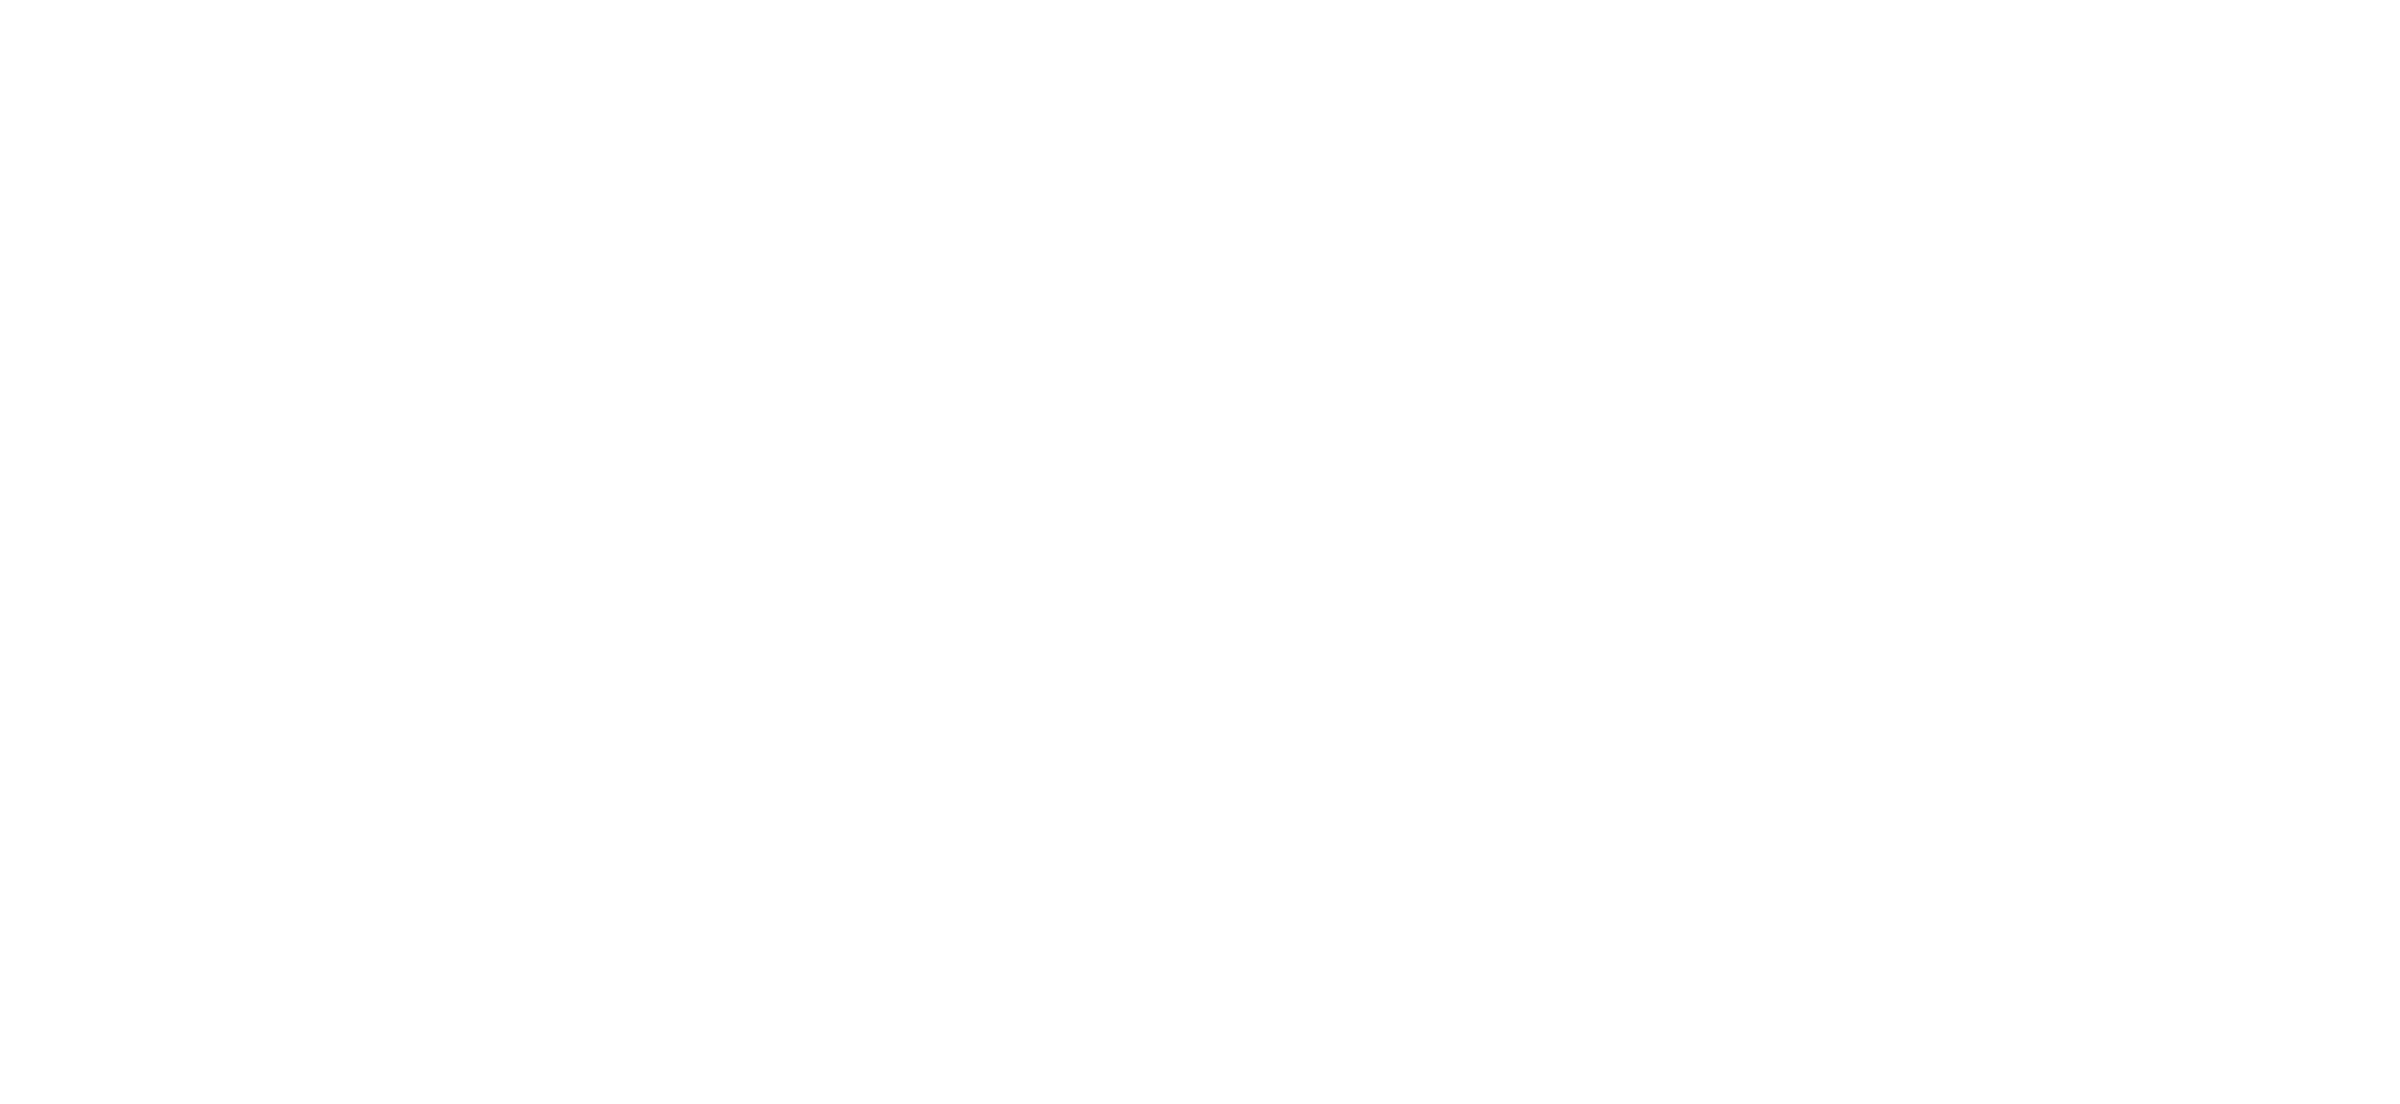 The Star Wars logo. It is colored white.